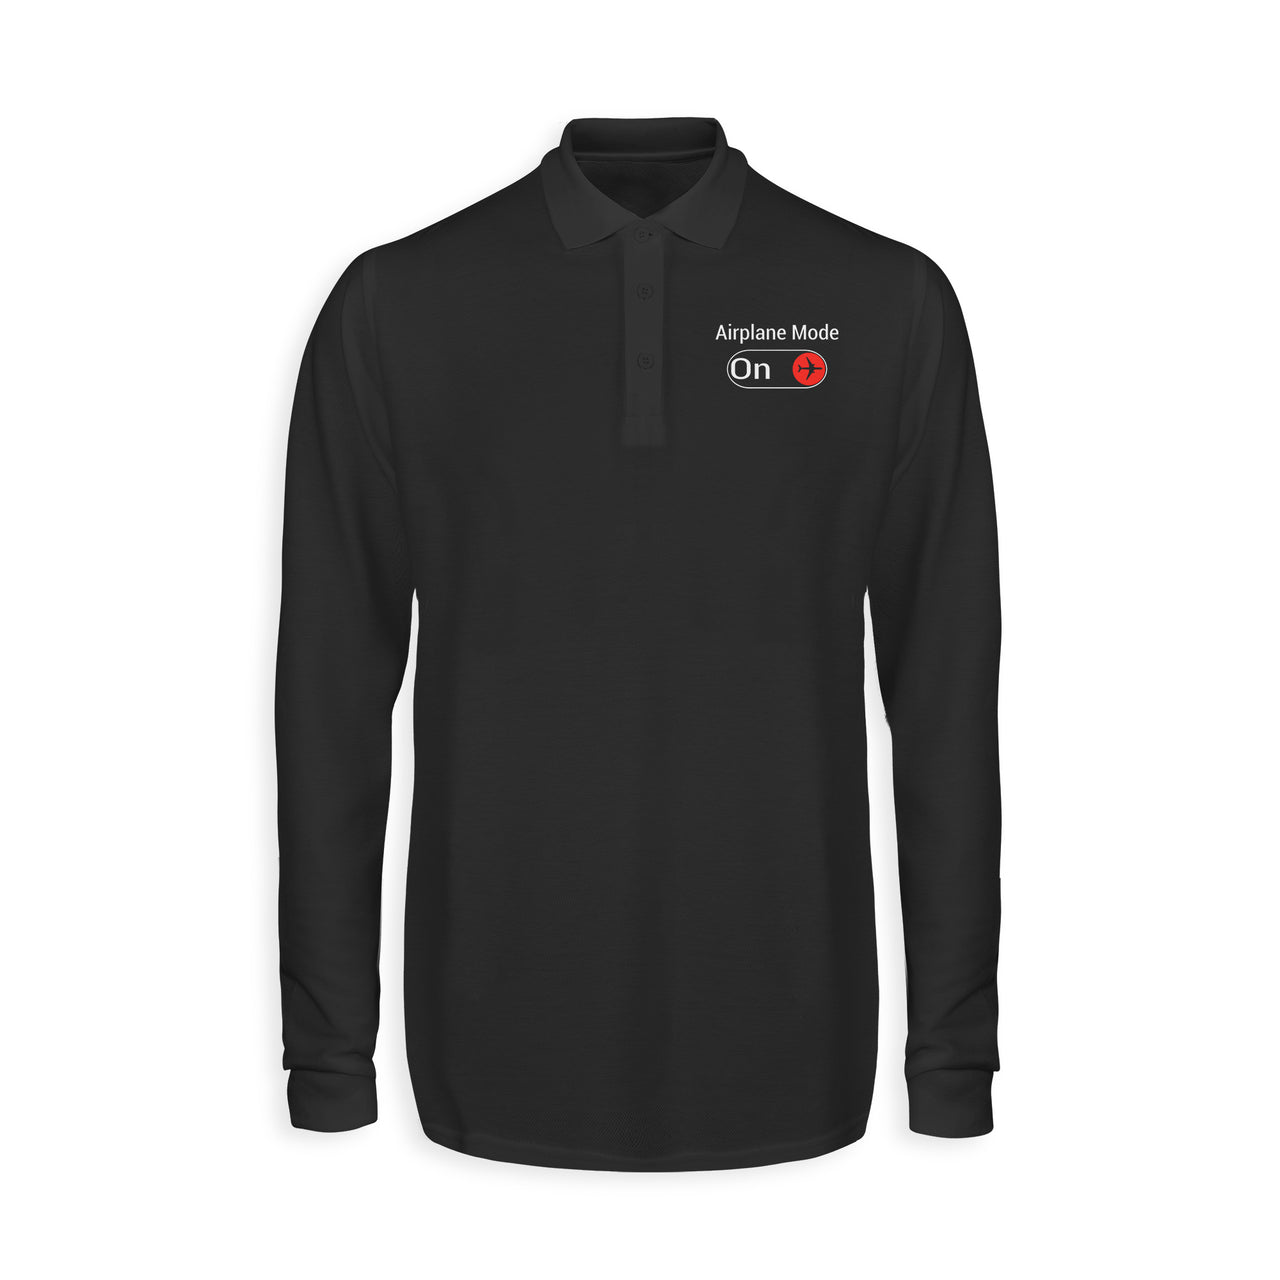 Airplane Mode On Designed Long Sleeve Polo T-Shirts